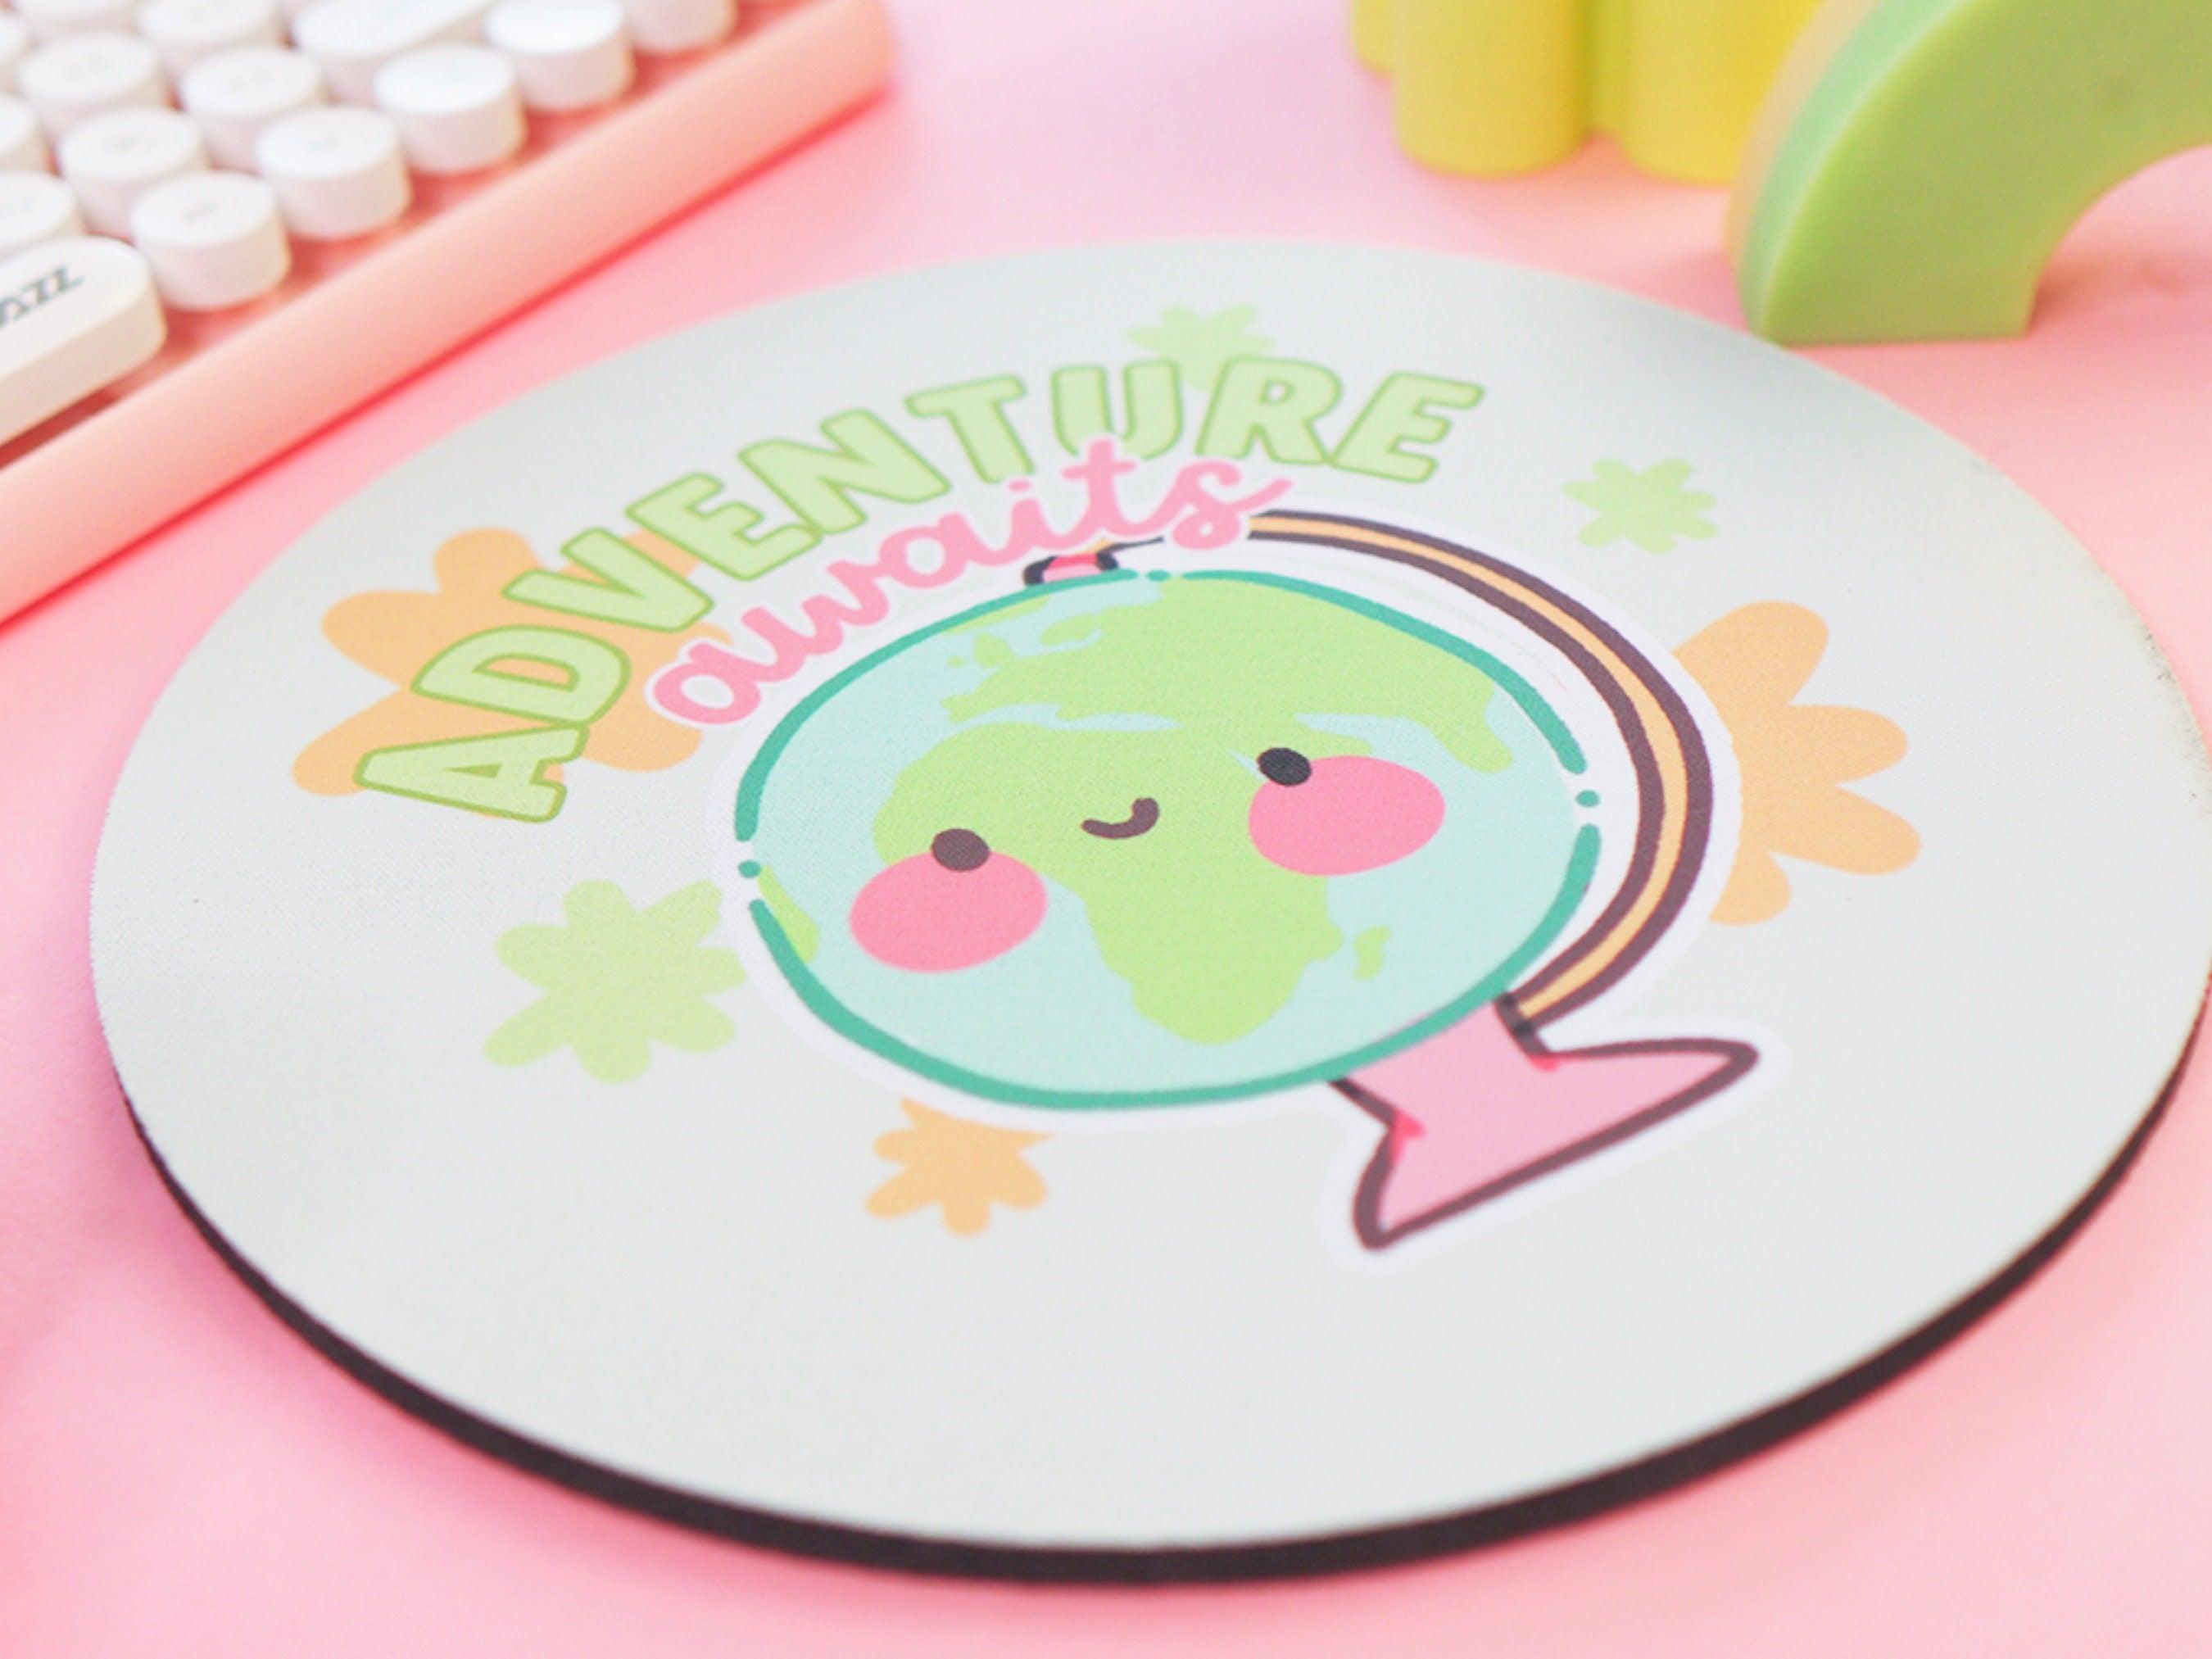 Adventure Awaits Travel Lover Mouse Pad and Mouse Mat - Hand-Printed Desk Accessories - Danish Pastel Aesthetic - Neoprene Rubber and Polyester - Katnipp Studio, secondary